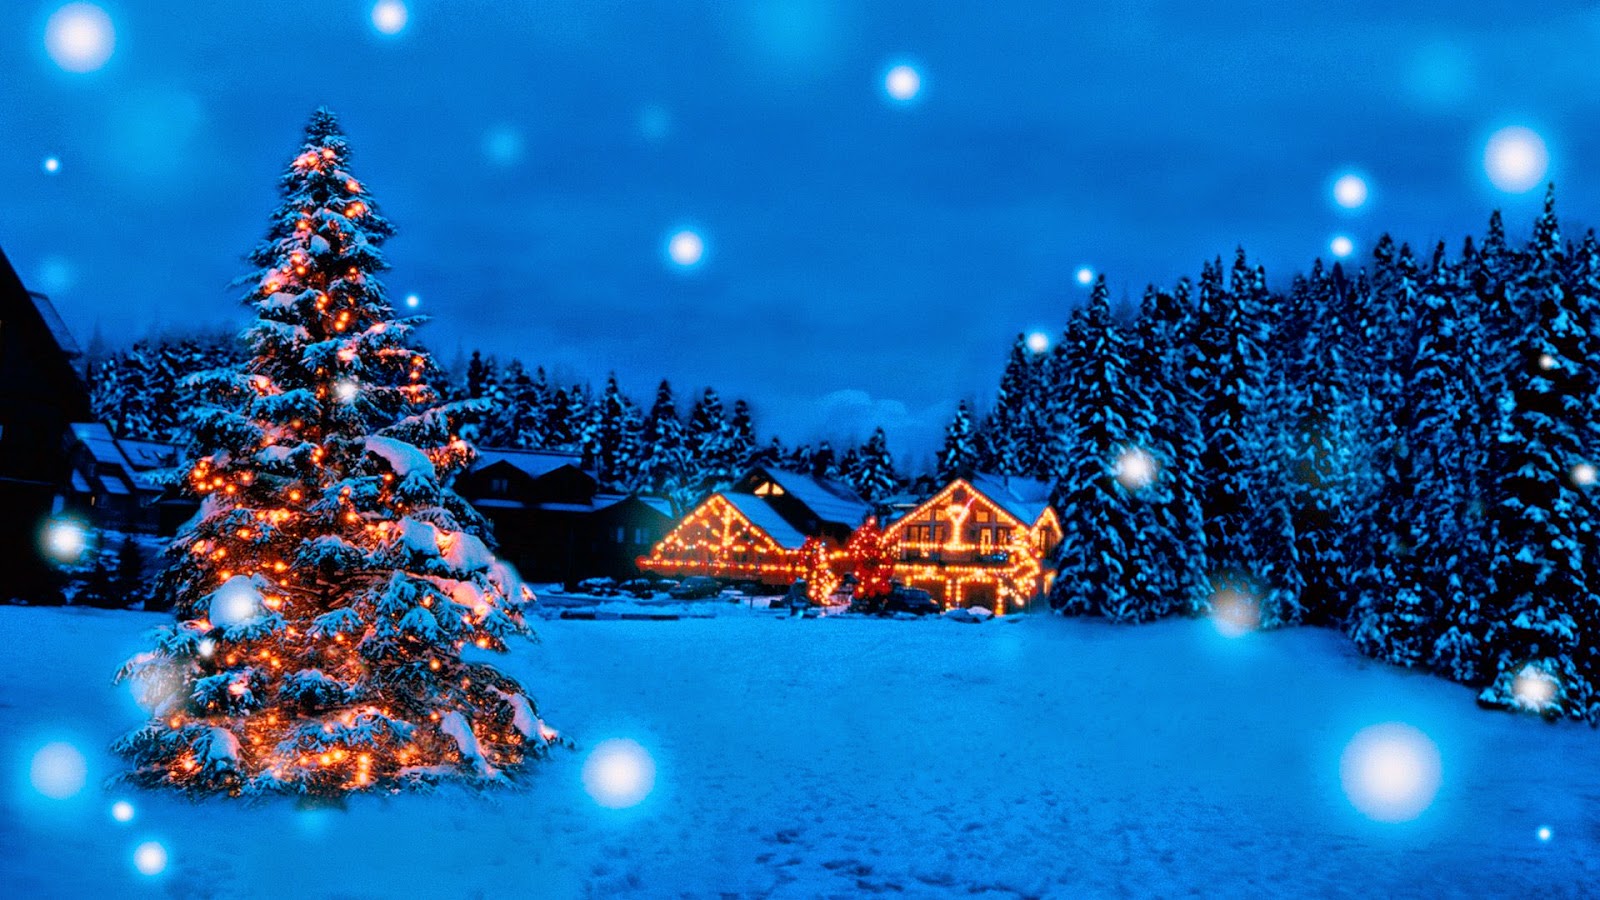 25 Selected xmas wallpaper for desktop hd You Can Save It Without A ...